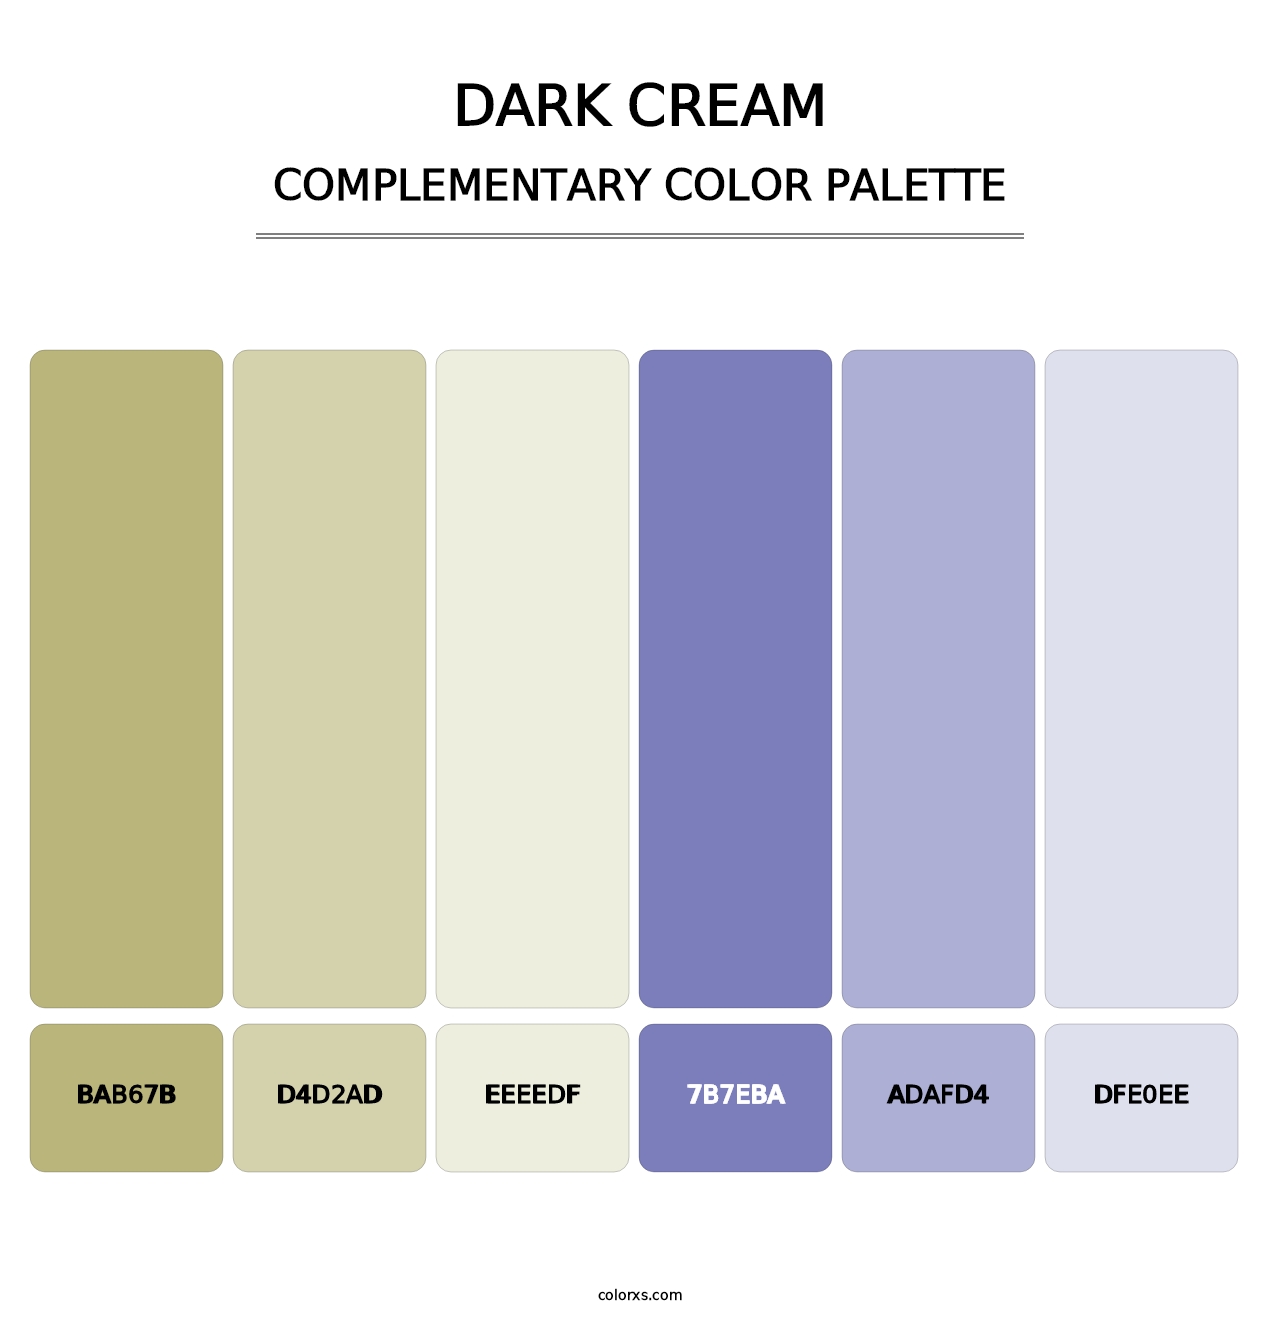 Dark Cream - Complementary Color Palette